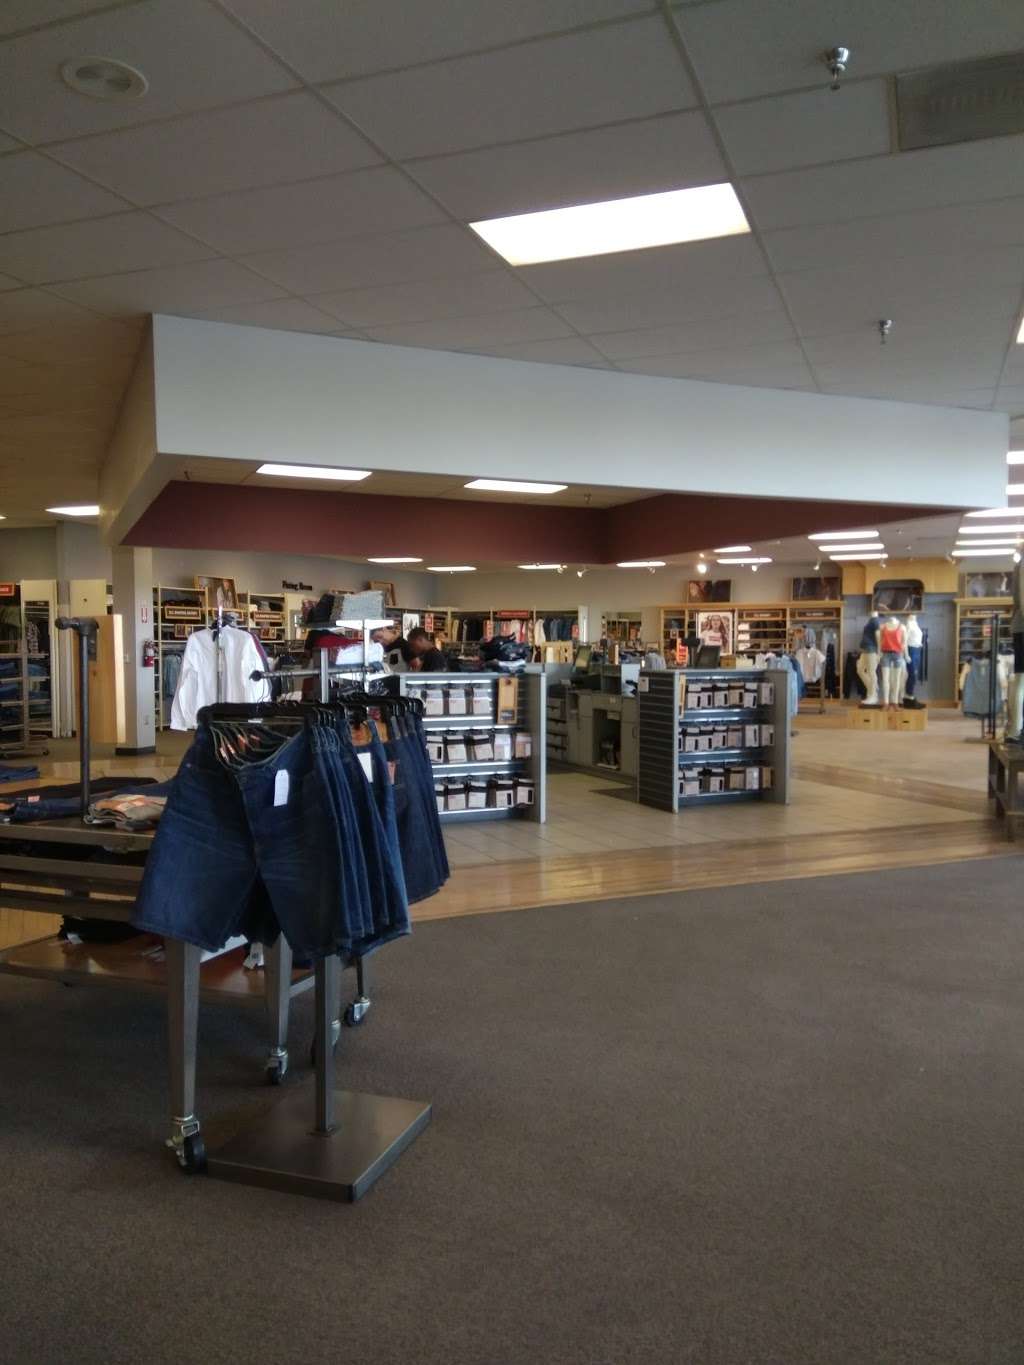 Levis® Outlet Store at Tanger Outlets Lancaster | 44920 S Valley Central Way Ste- 101, Lancaster, CA 93534, USA | Phone: (661) 942-0495